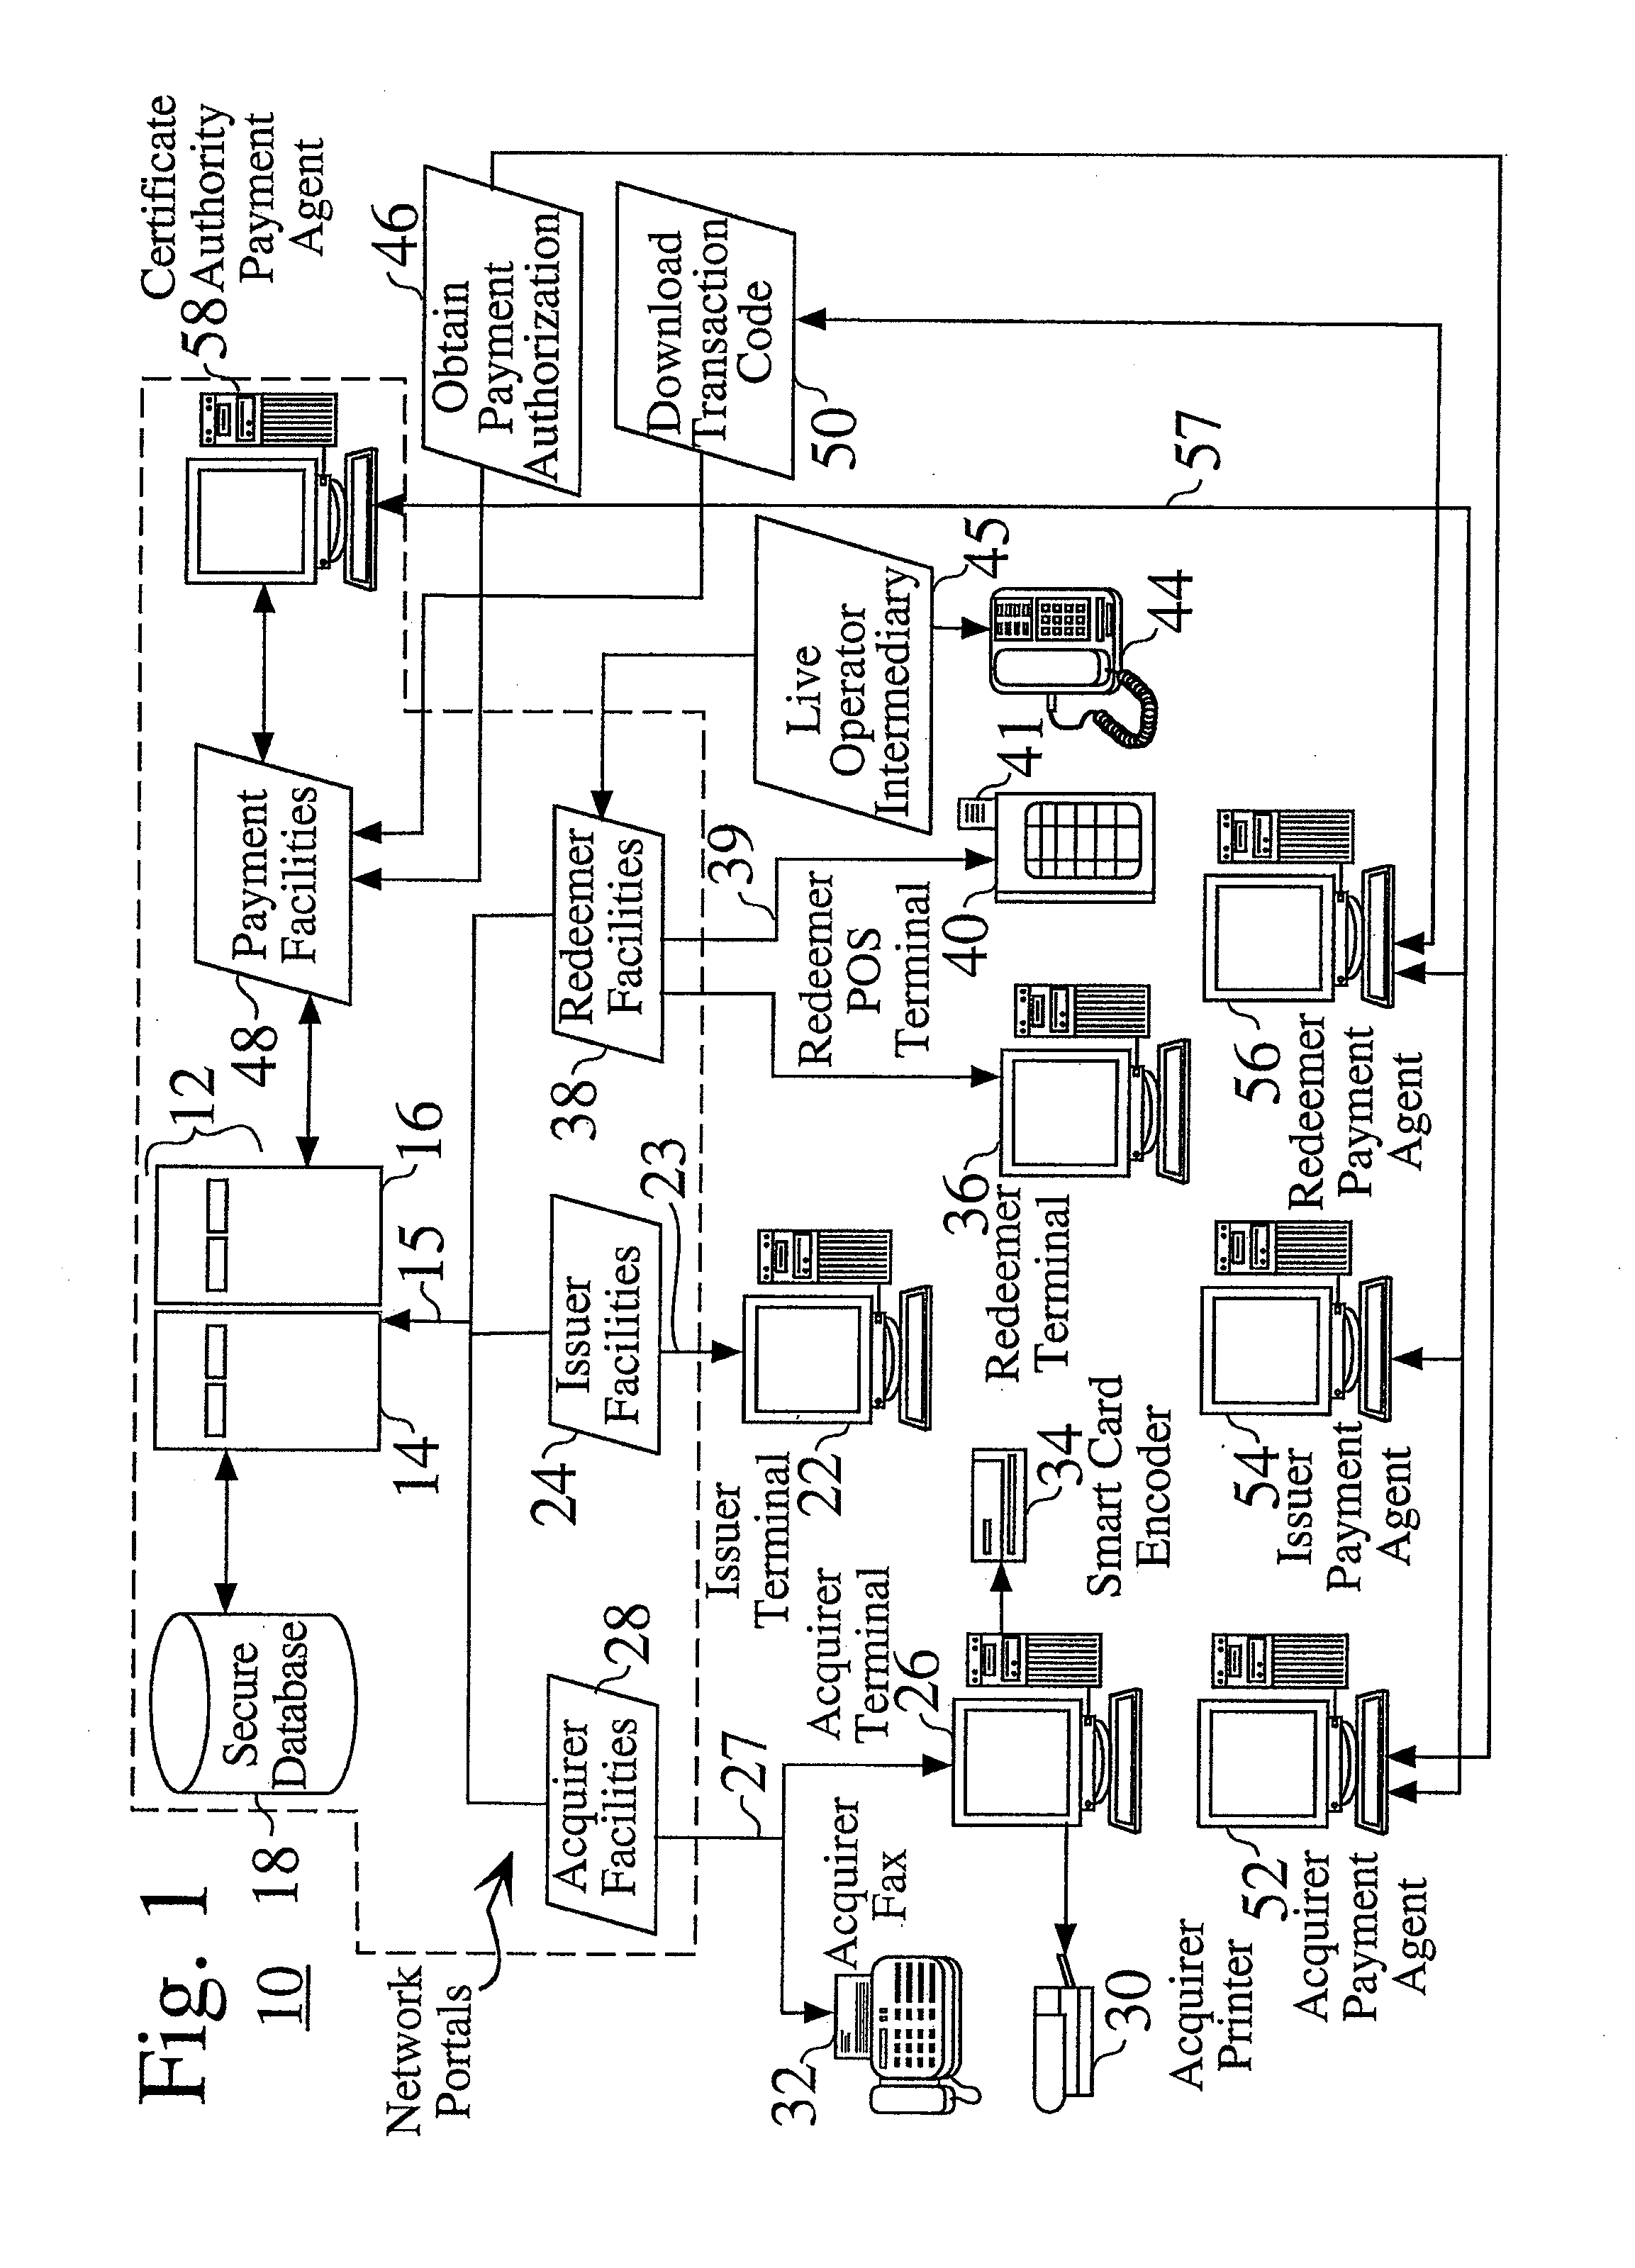 Secure system for the issuance, acquisition, and redemption of certificates in a transaction network